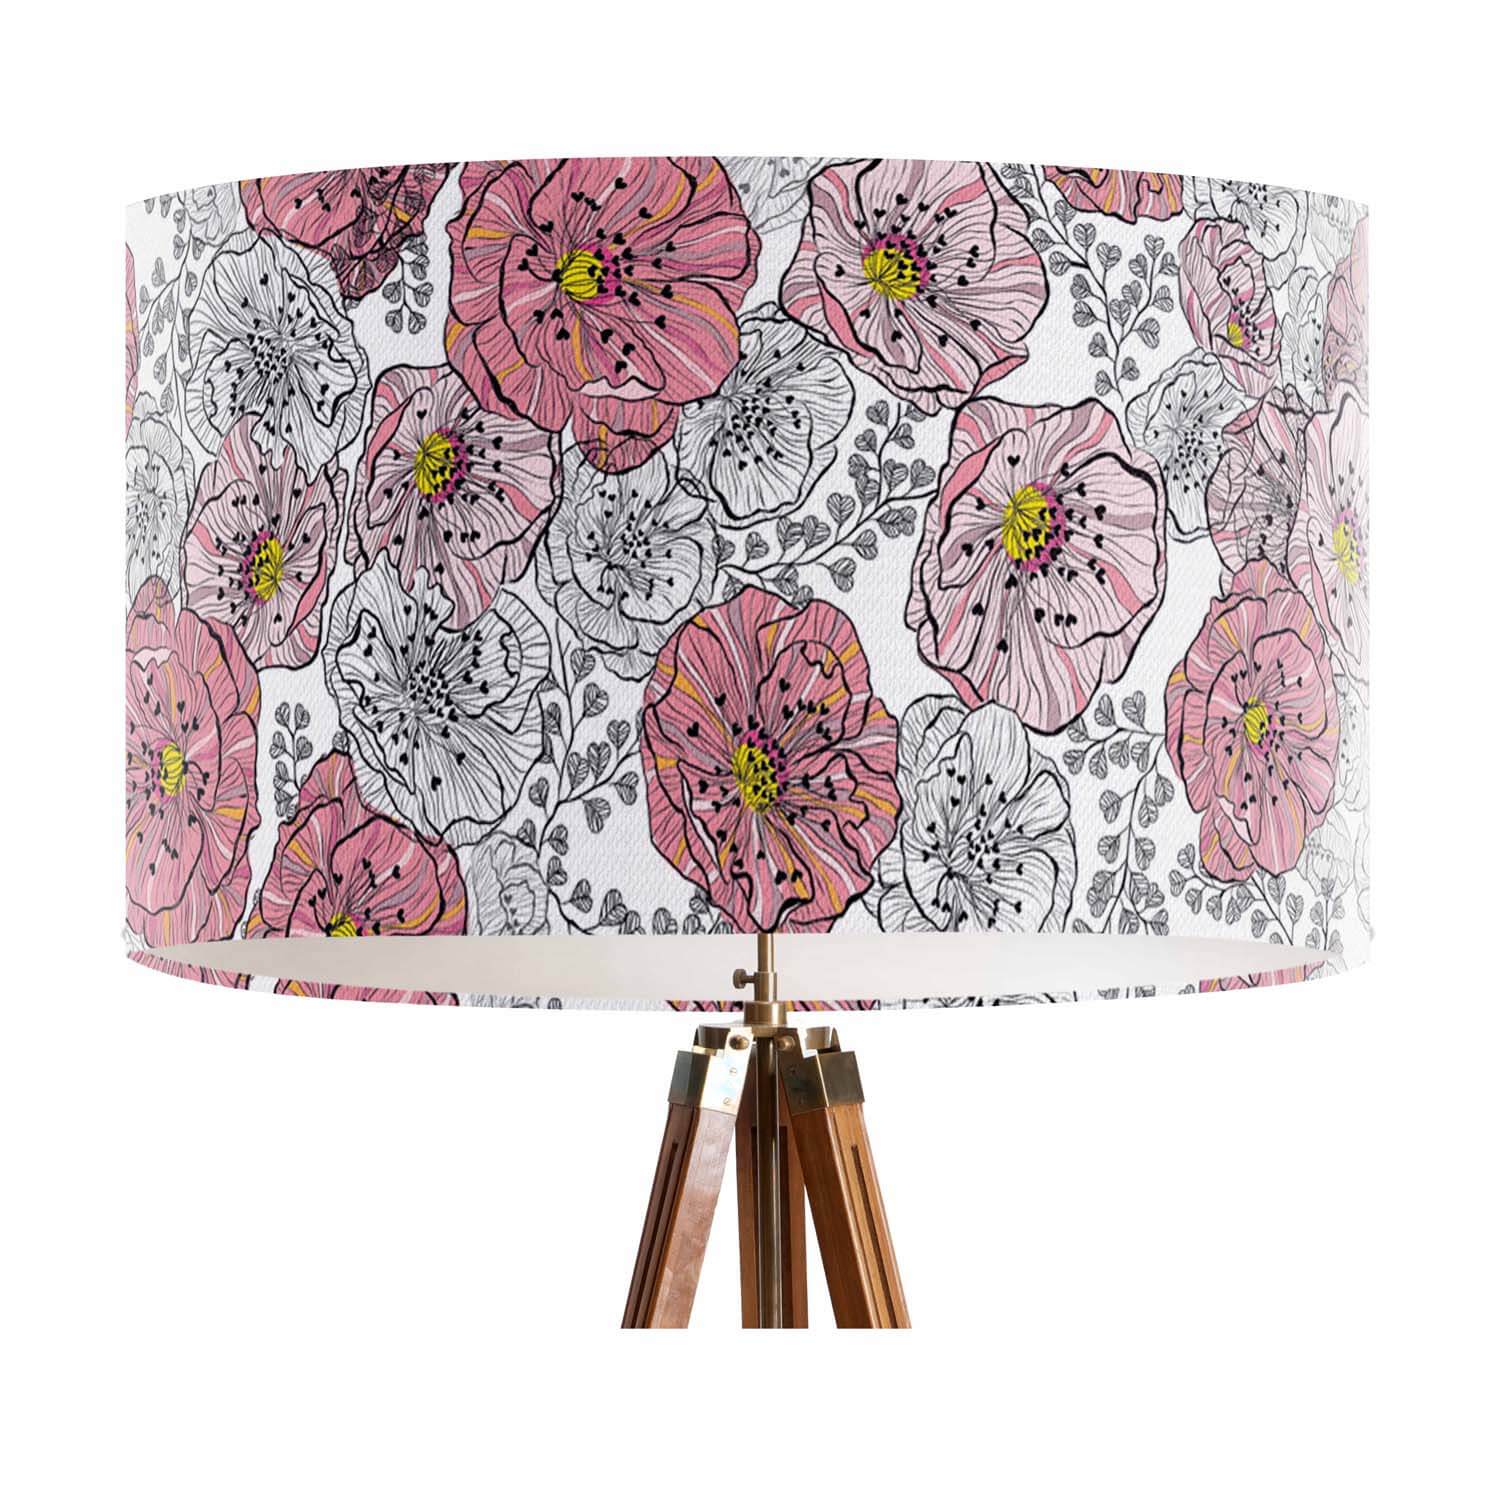 Sketch Roses - Paradise Garden - House Of Turnowsky Lampshade